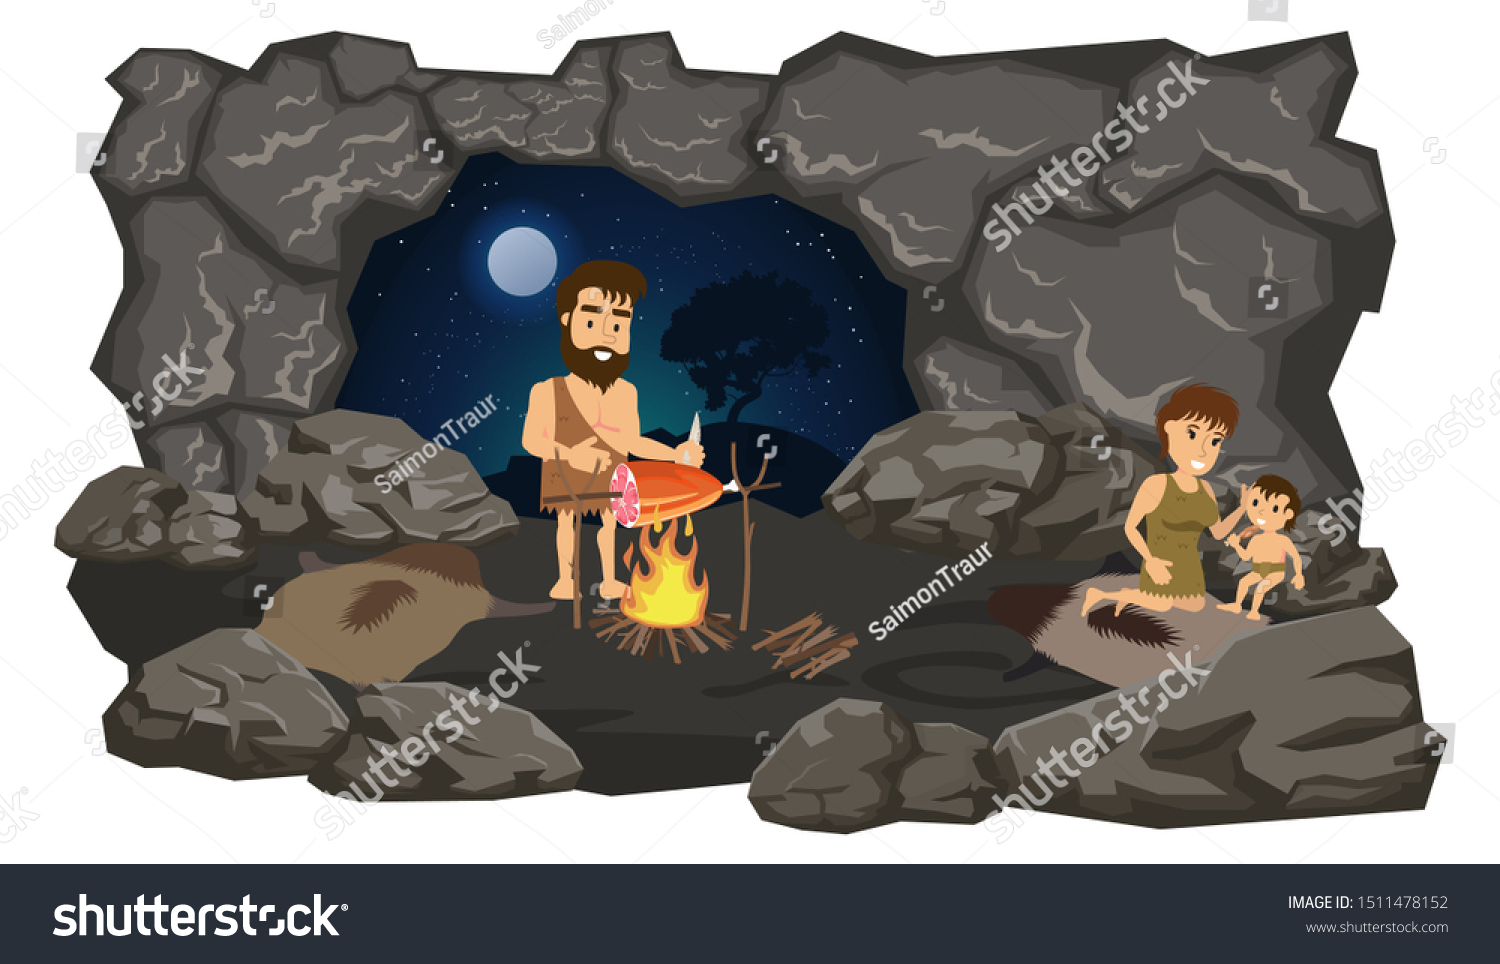 SVG of flat composition Primitive people in the cave. Vector stock illustration, flat design style. Isolated on a white background. svg